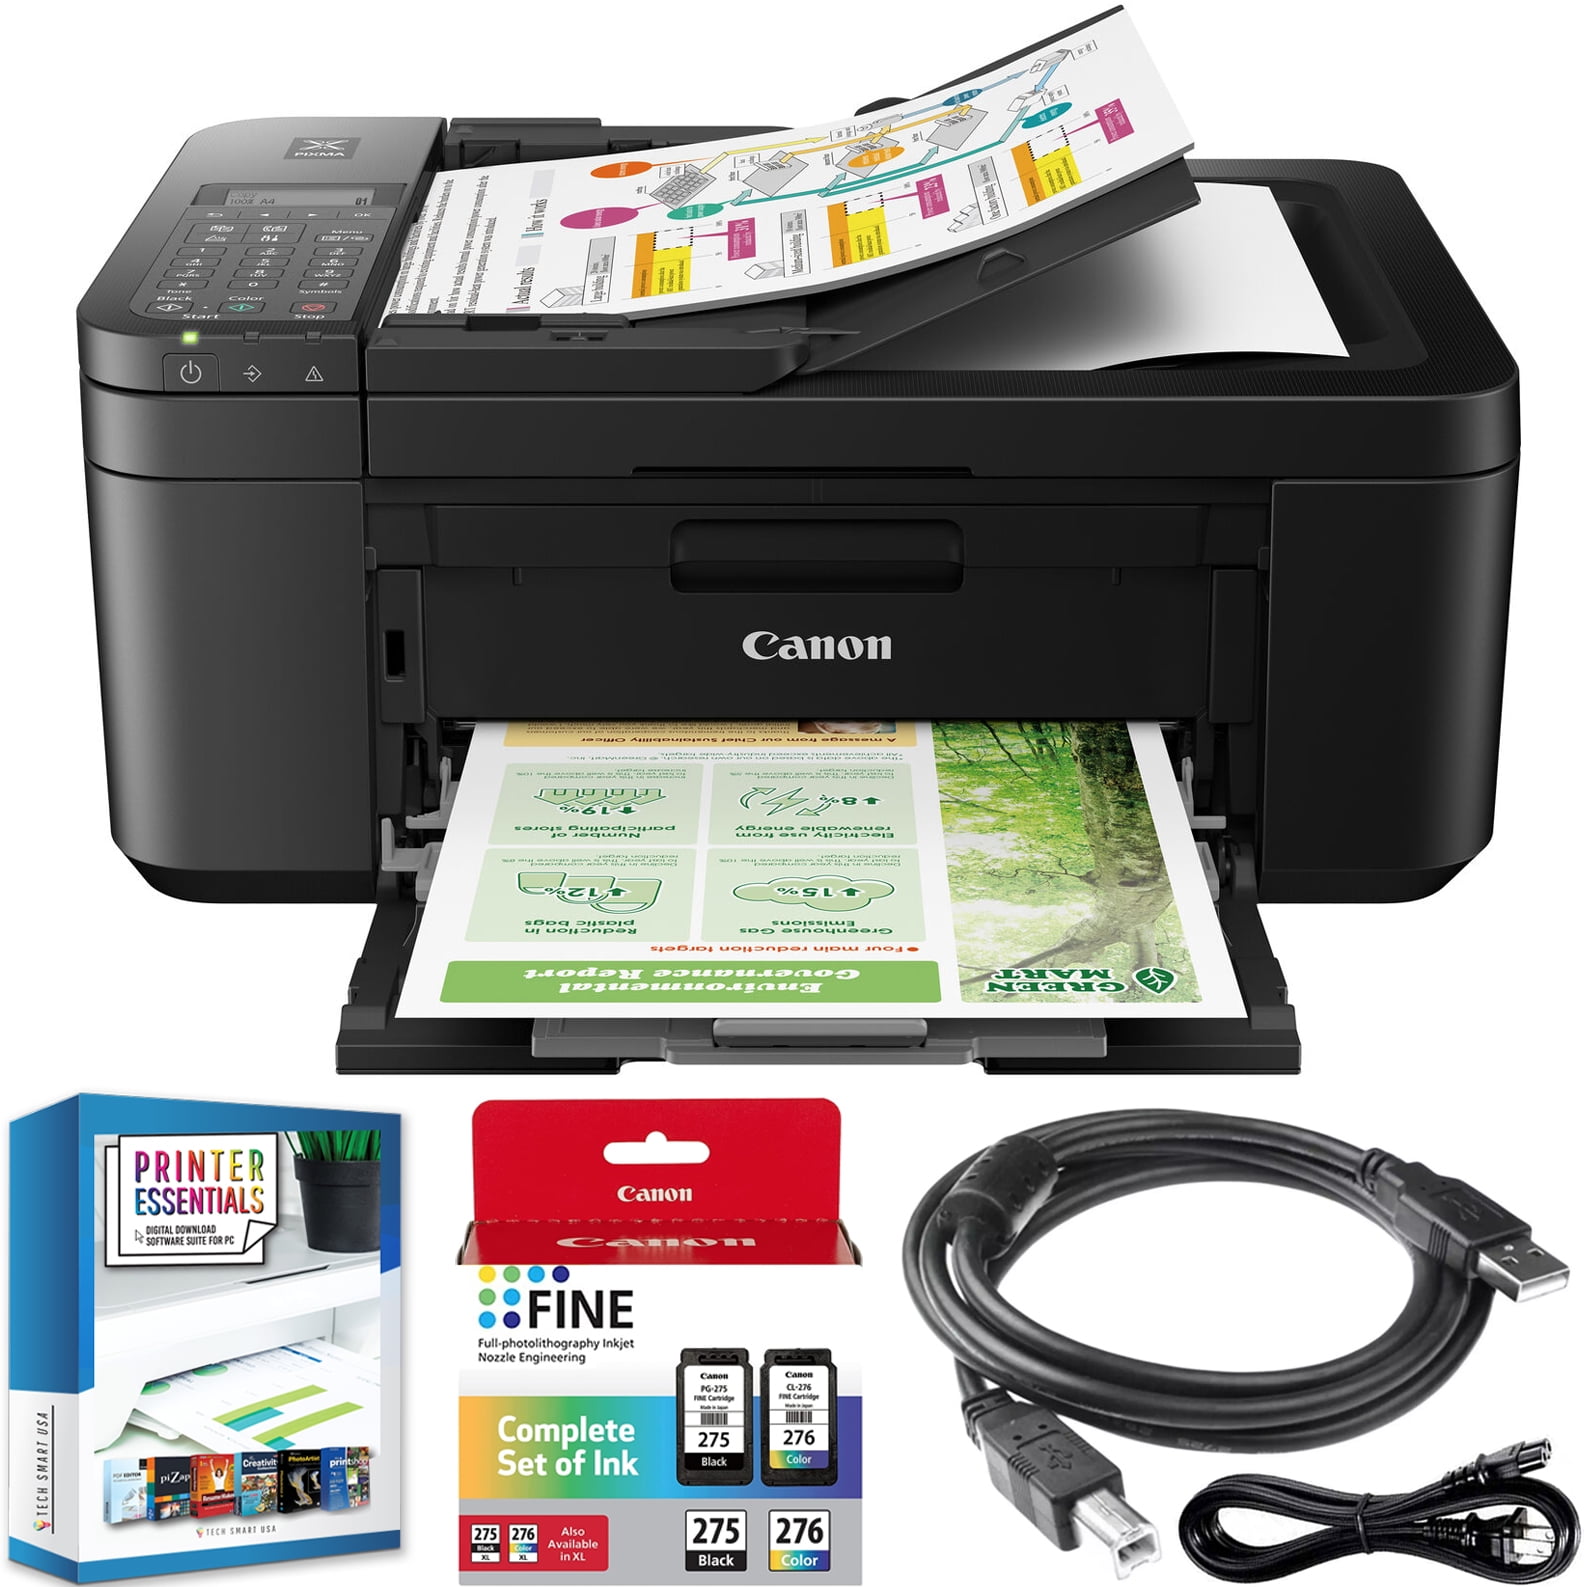 Canon PIXMA TR4720 All-in-One Printer with Auto Document Feeder, Mobile Printing, Copy, Fax and Black 5074C002 Bundle with DGE USB Connection Cable + Small Business Kit - Walmart.com